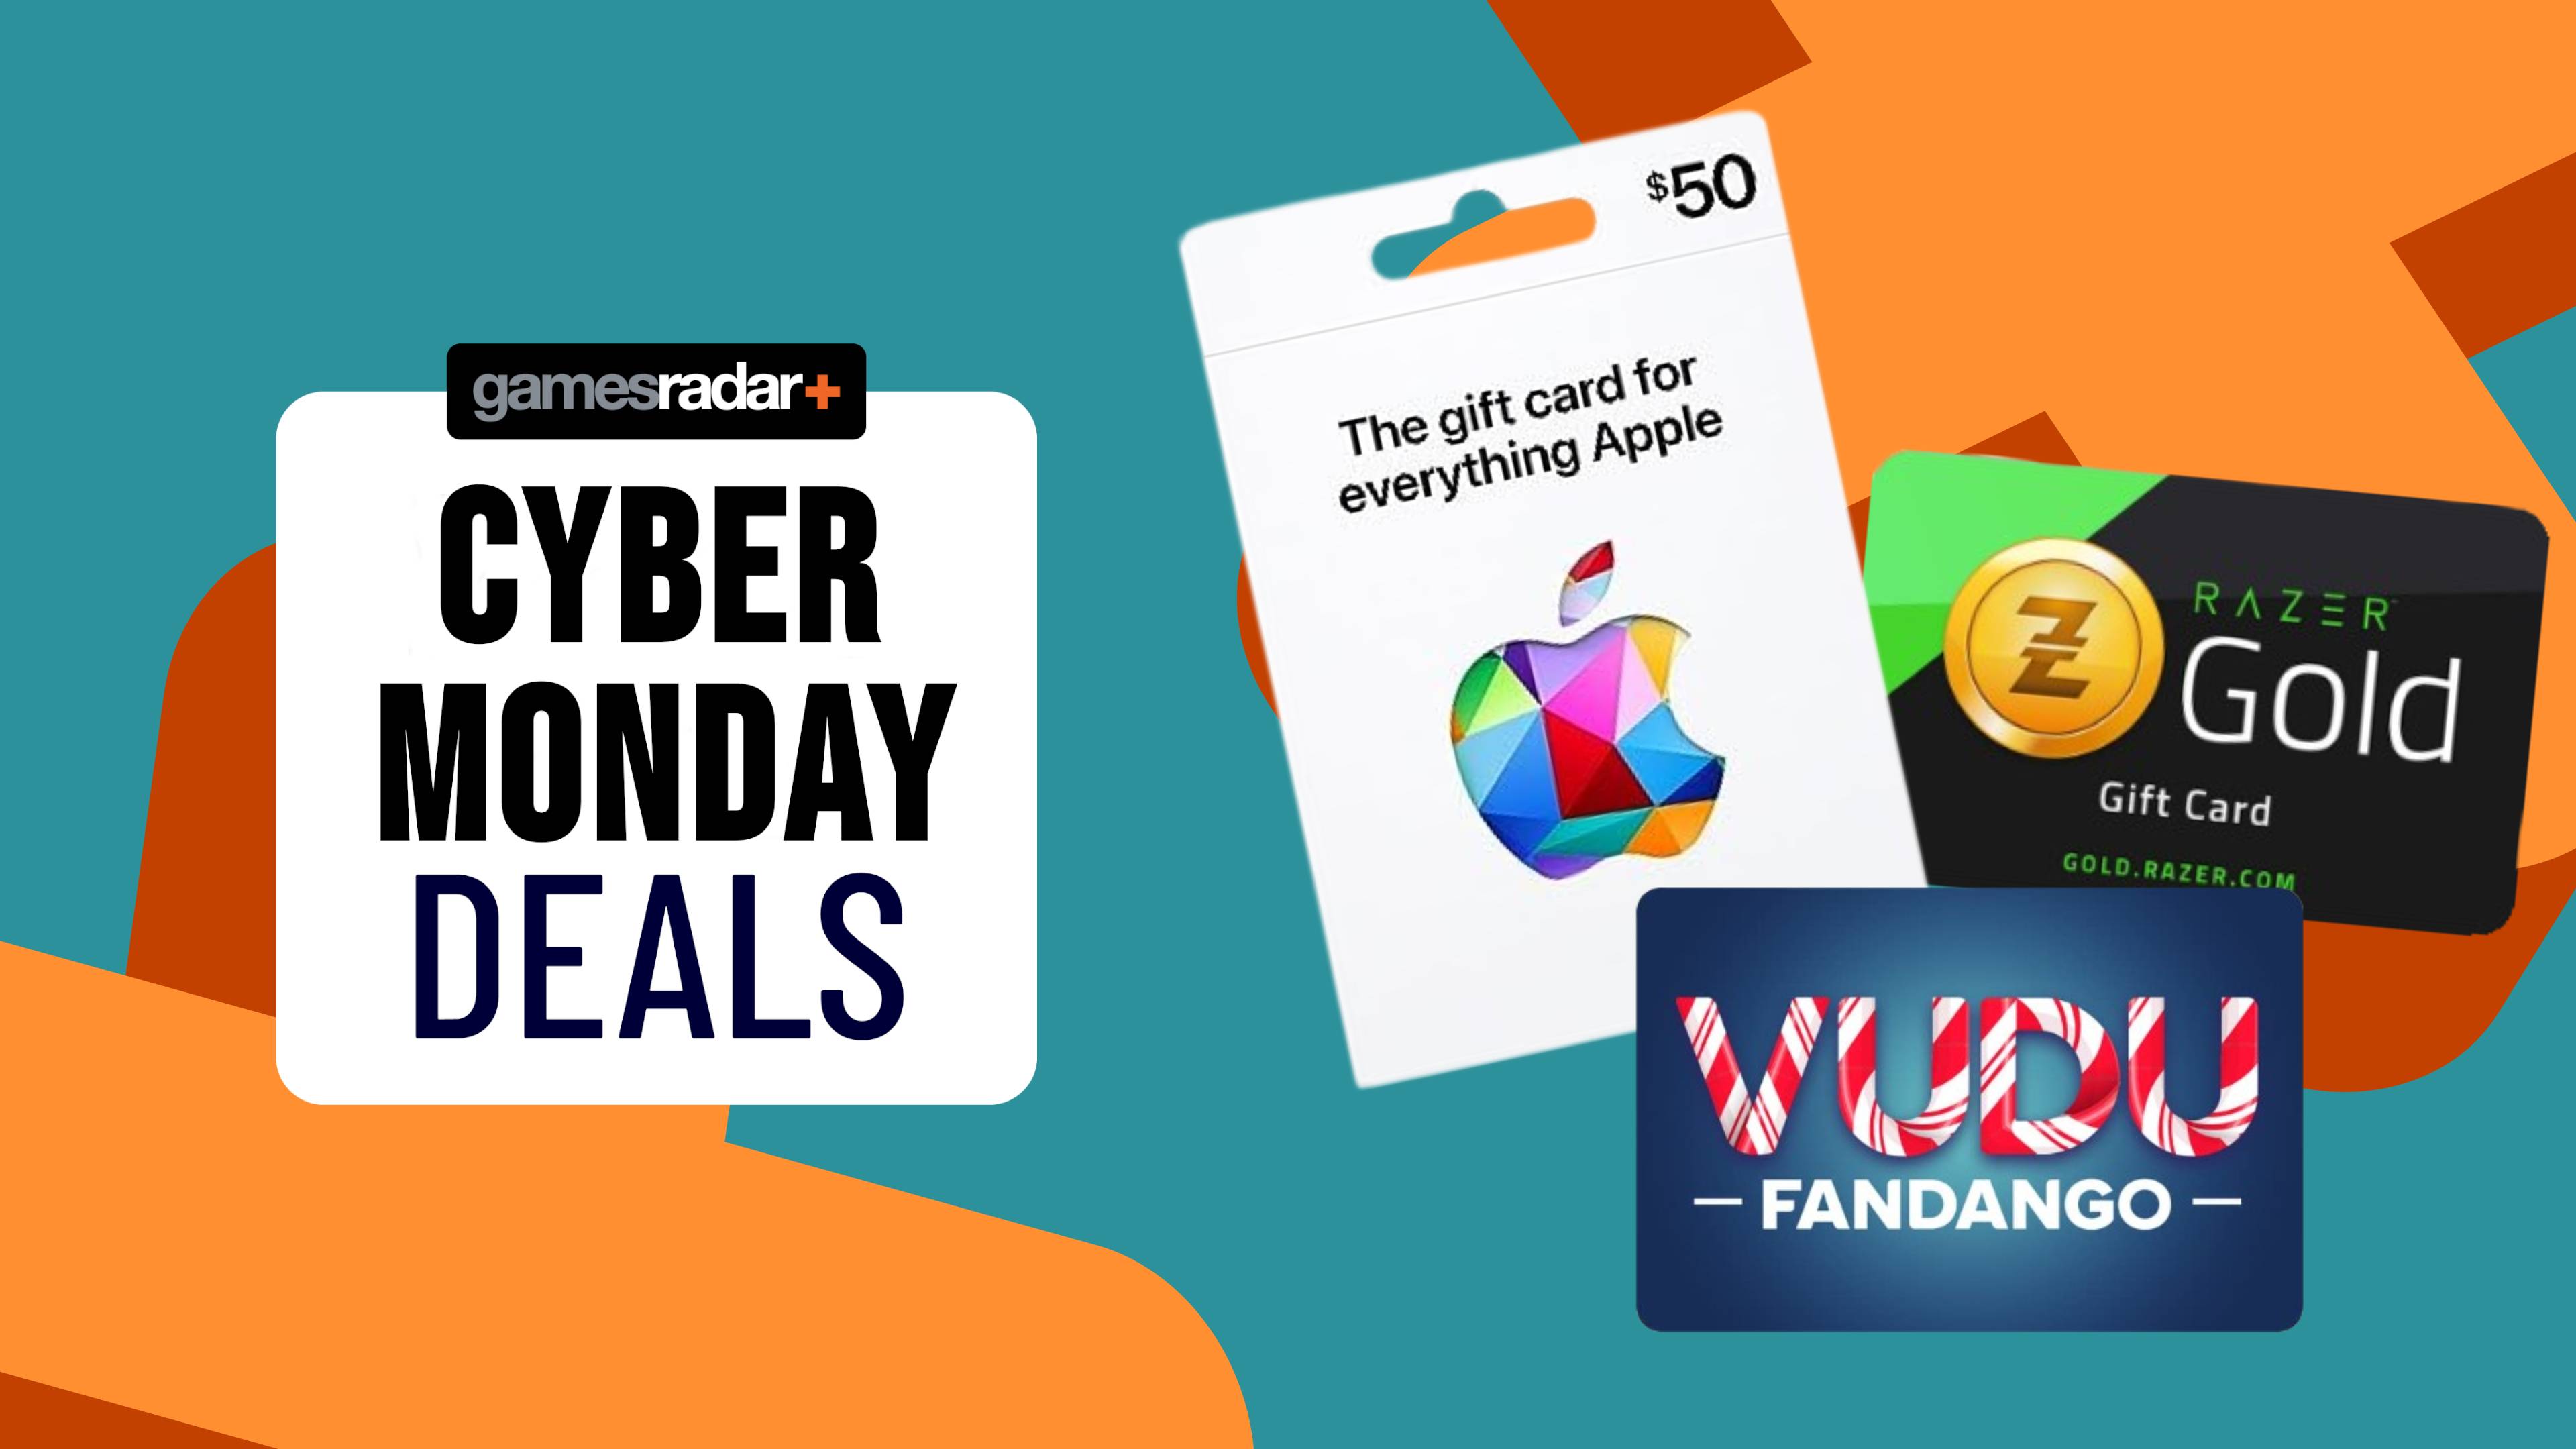 s Cyber Monday Gift Card Sale Is Basically Free Money - IGN